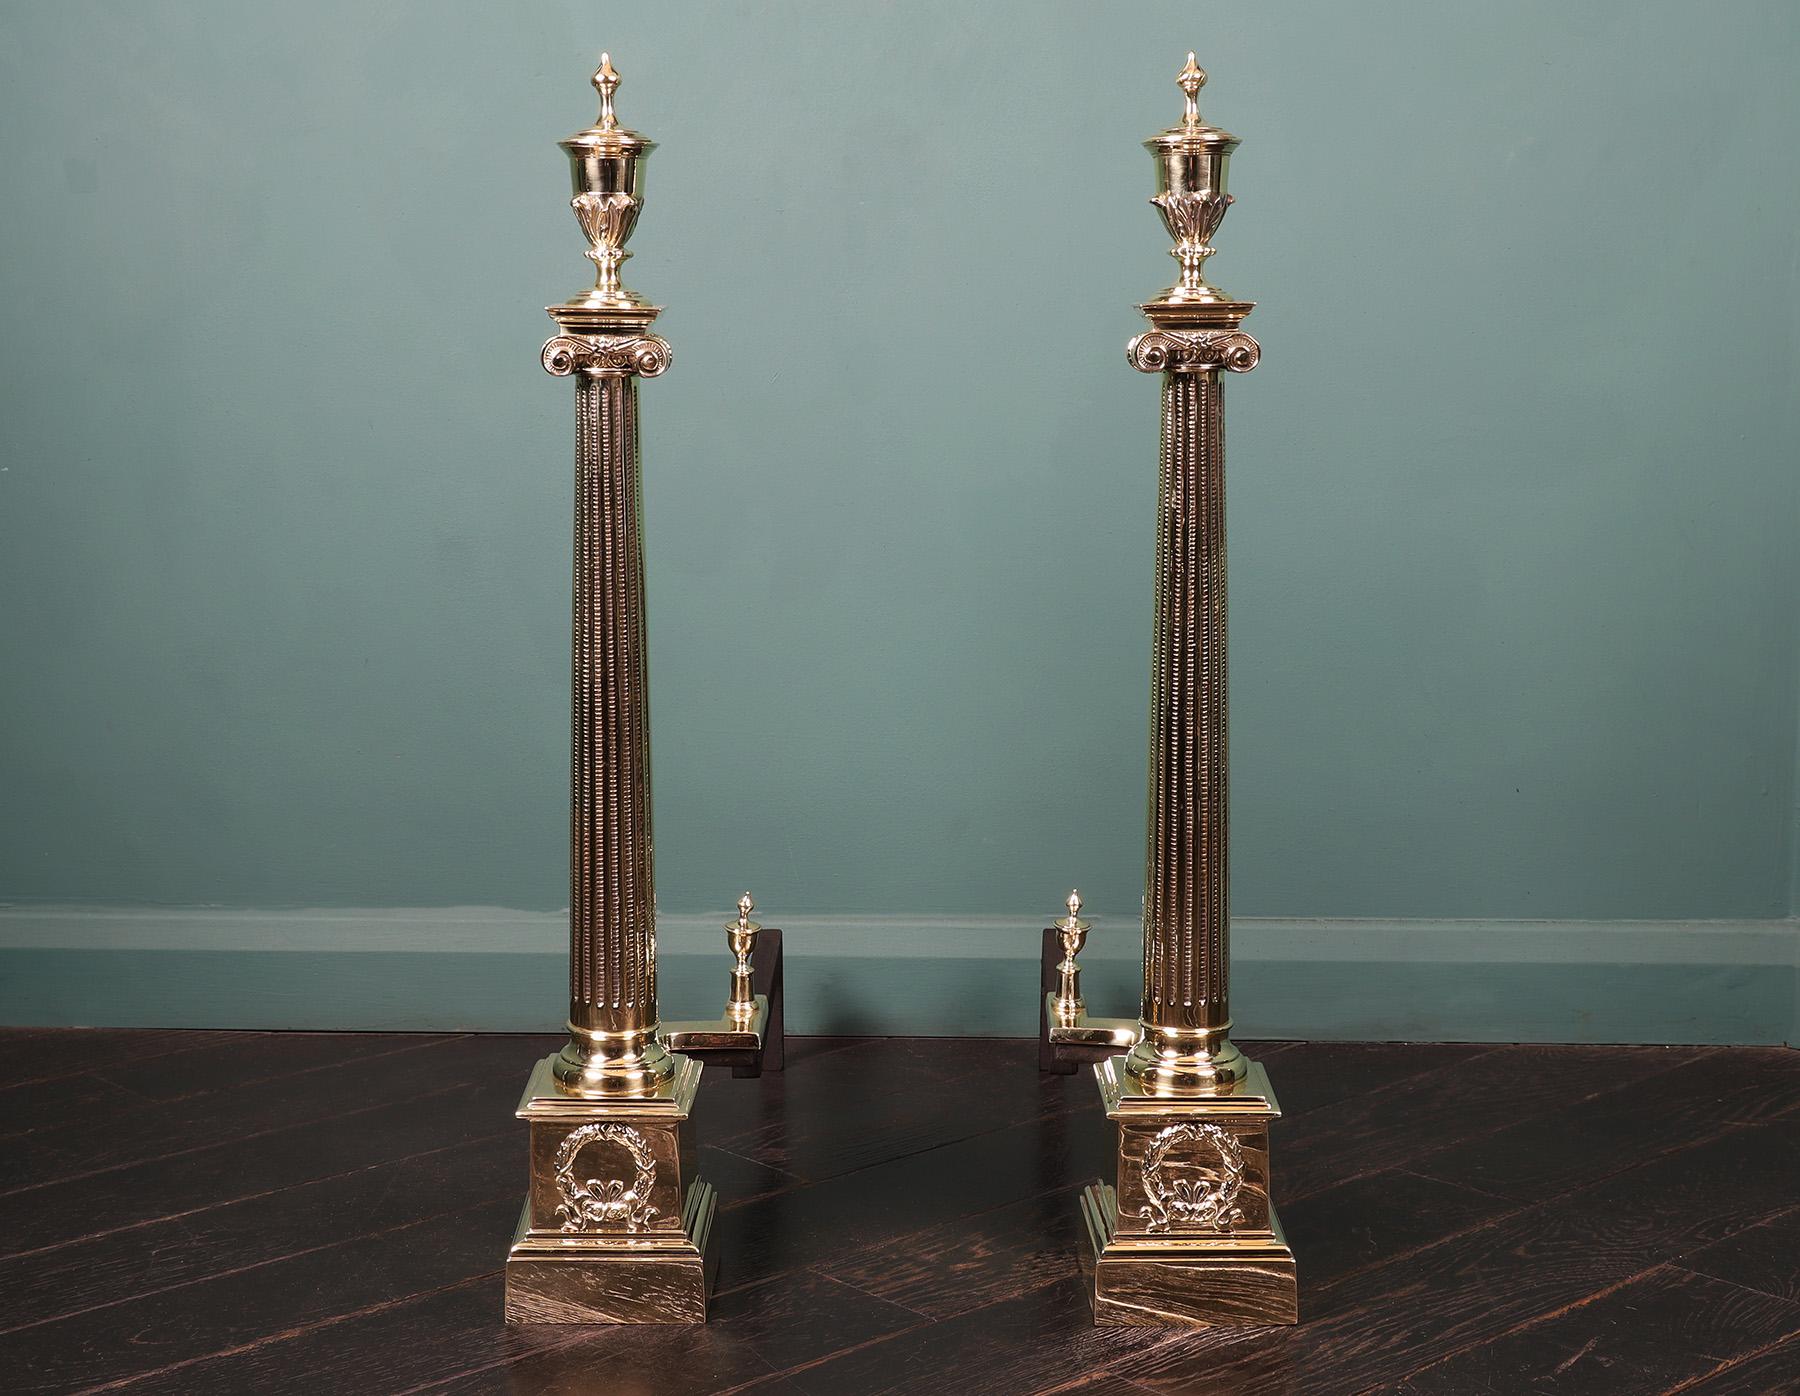 A pair of 19th Century Neo-classical brass andirons with fluted tapered ionic columns mounted on square plinths decorated with circular wreaths. The rear log-supports are in iron with overlaid section in brass, small brass urn finials uppermost.